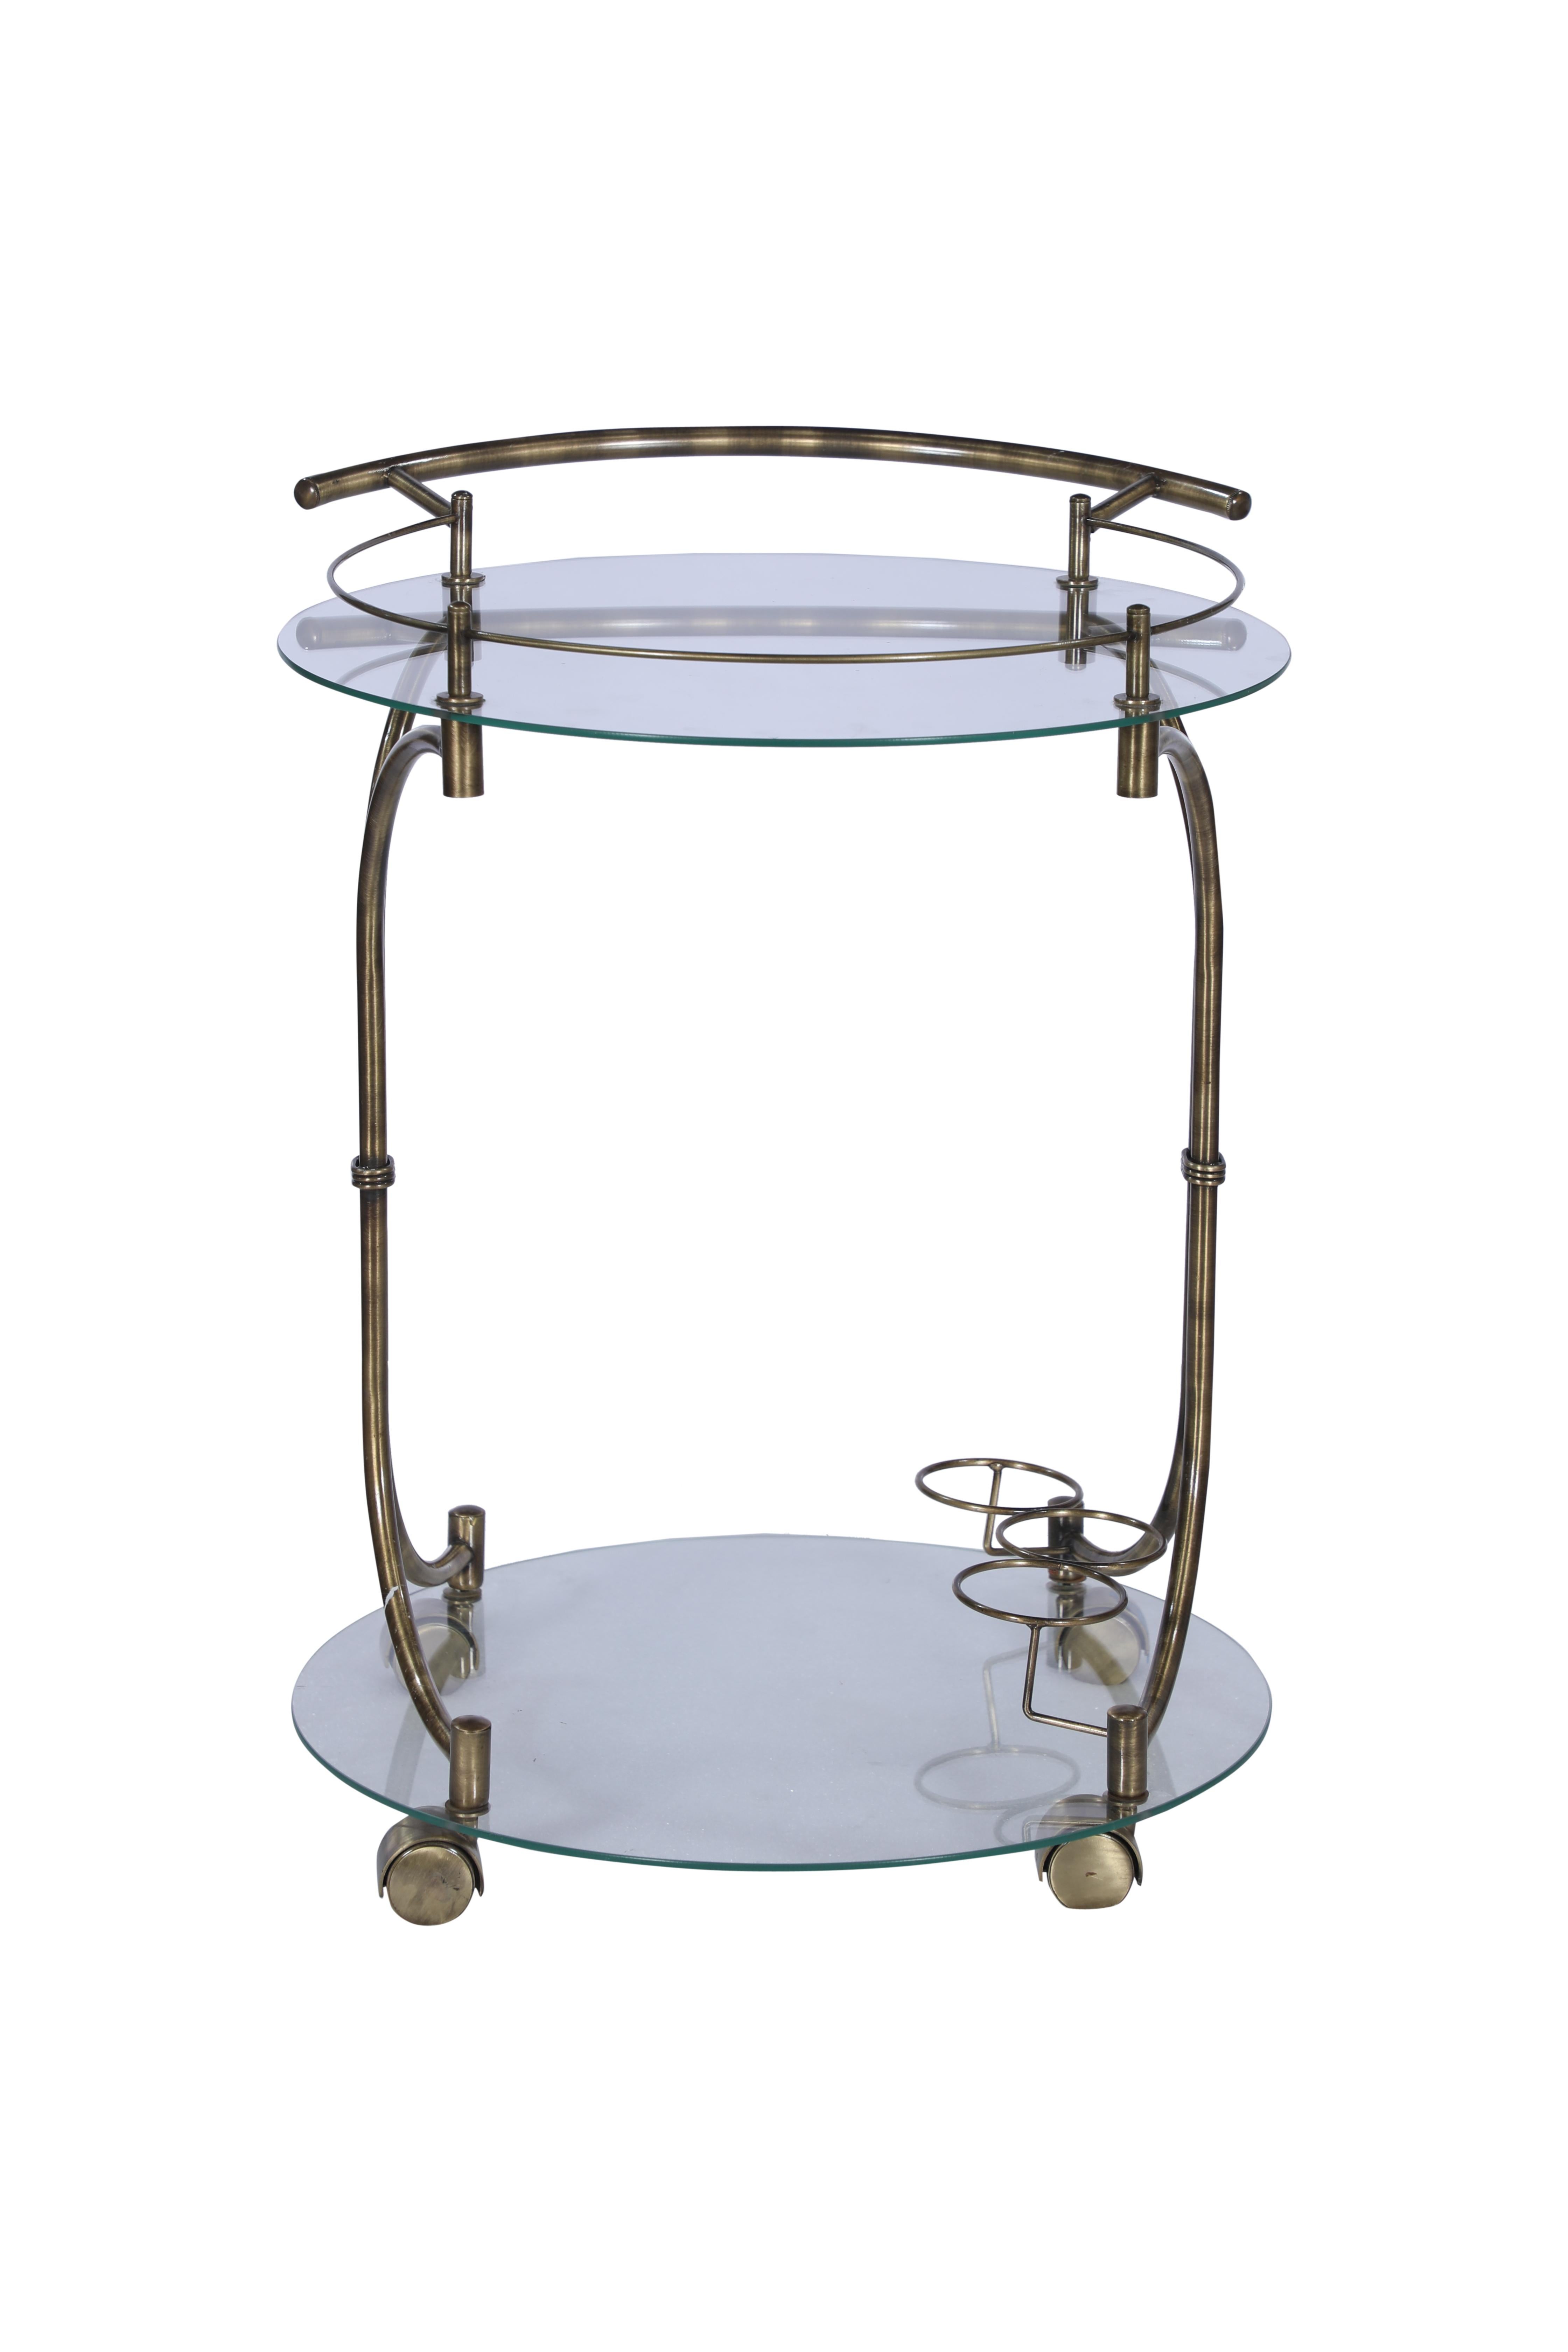 A handsome Mid-Century Modern brass bar cart with glass shelves. Features a handle on one side for moving around, and round swiveling wheels which allows it to do just that. It also has three round bottle holders at the bottom and a rail around the